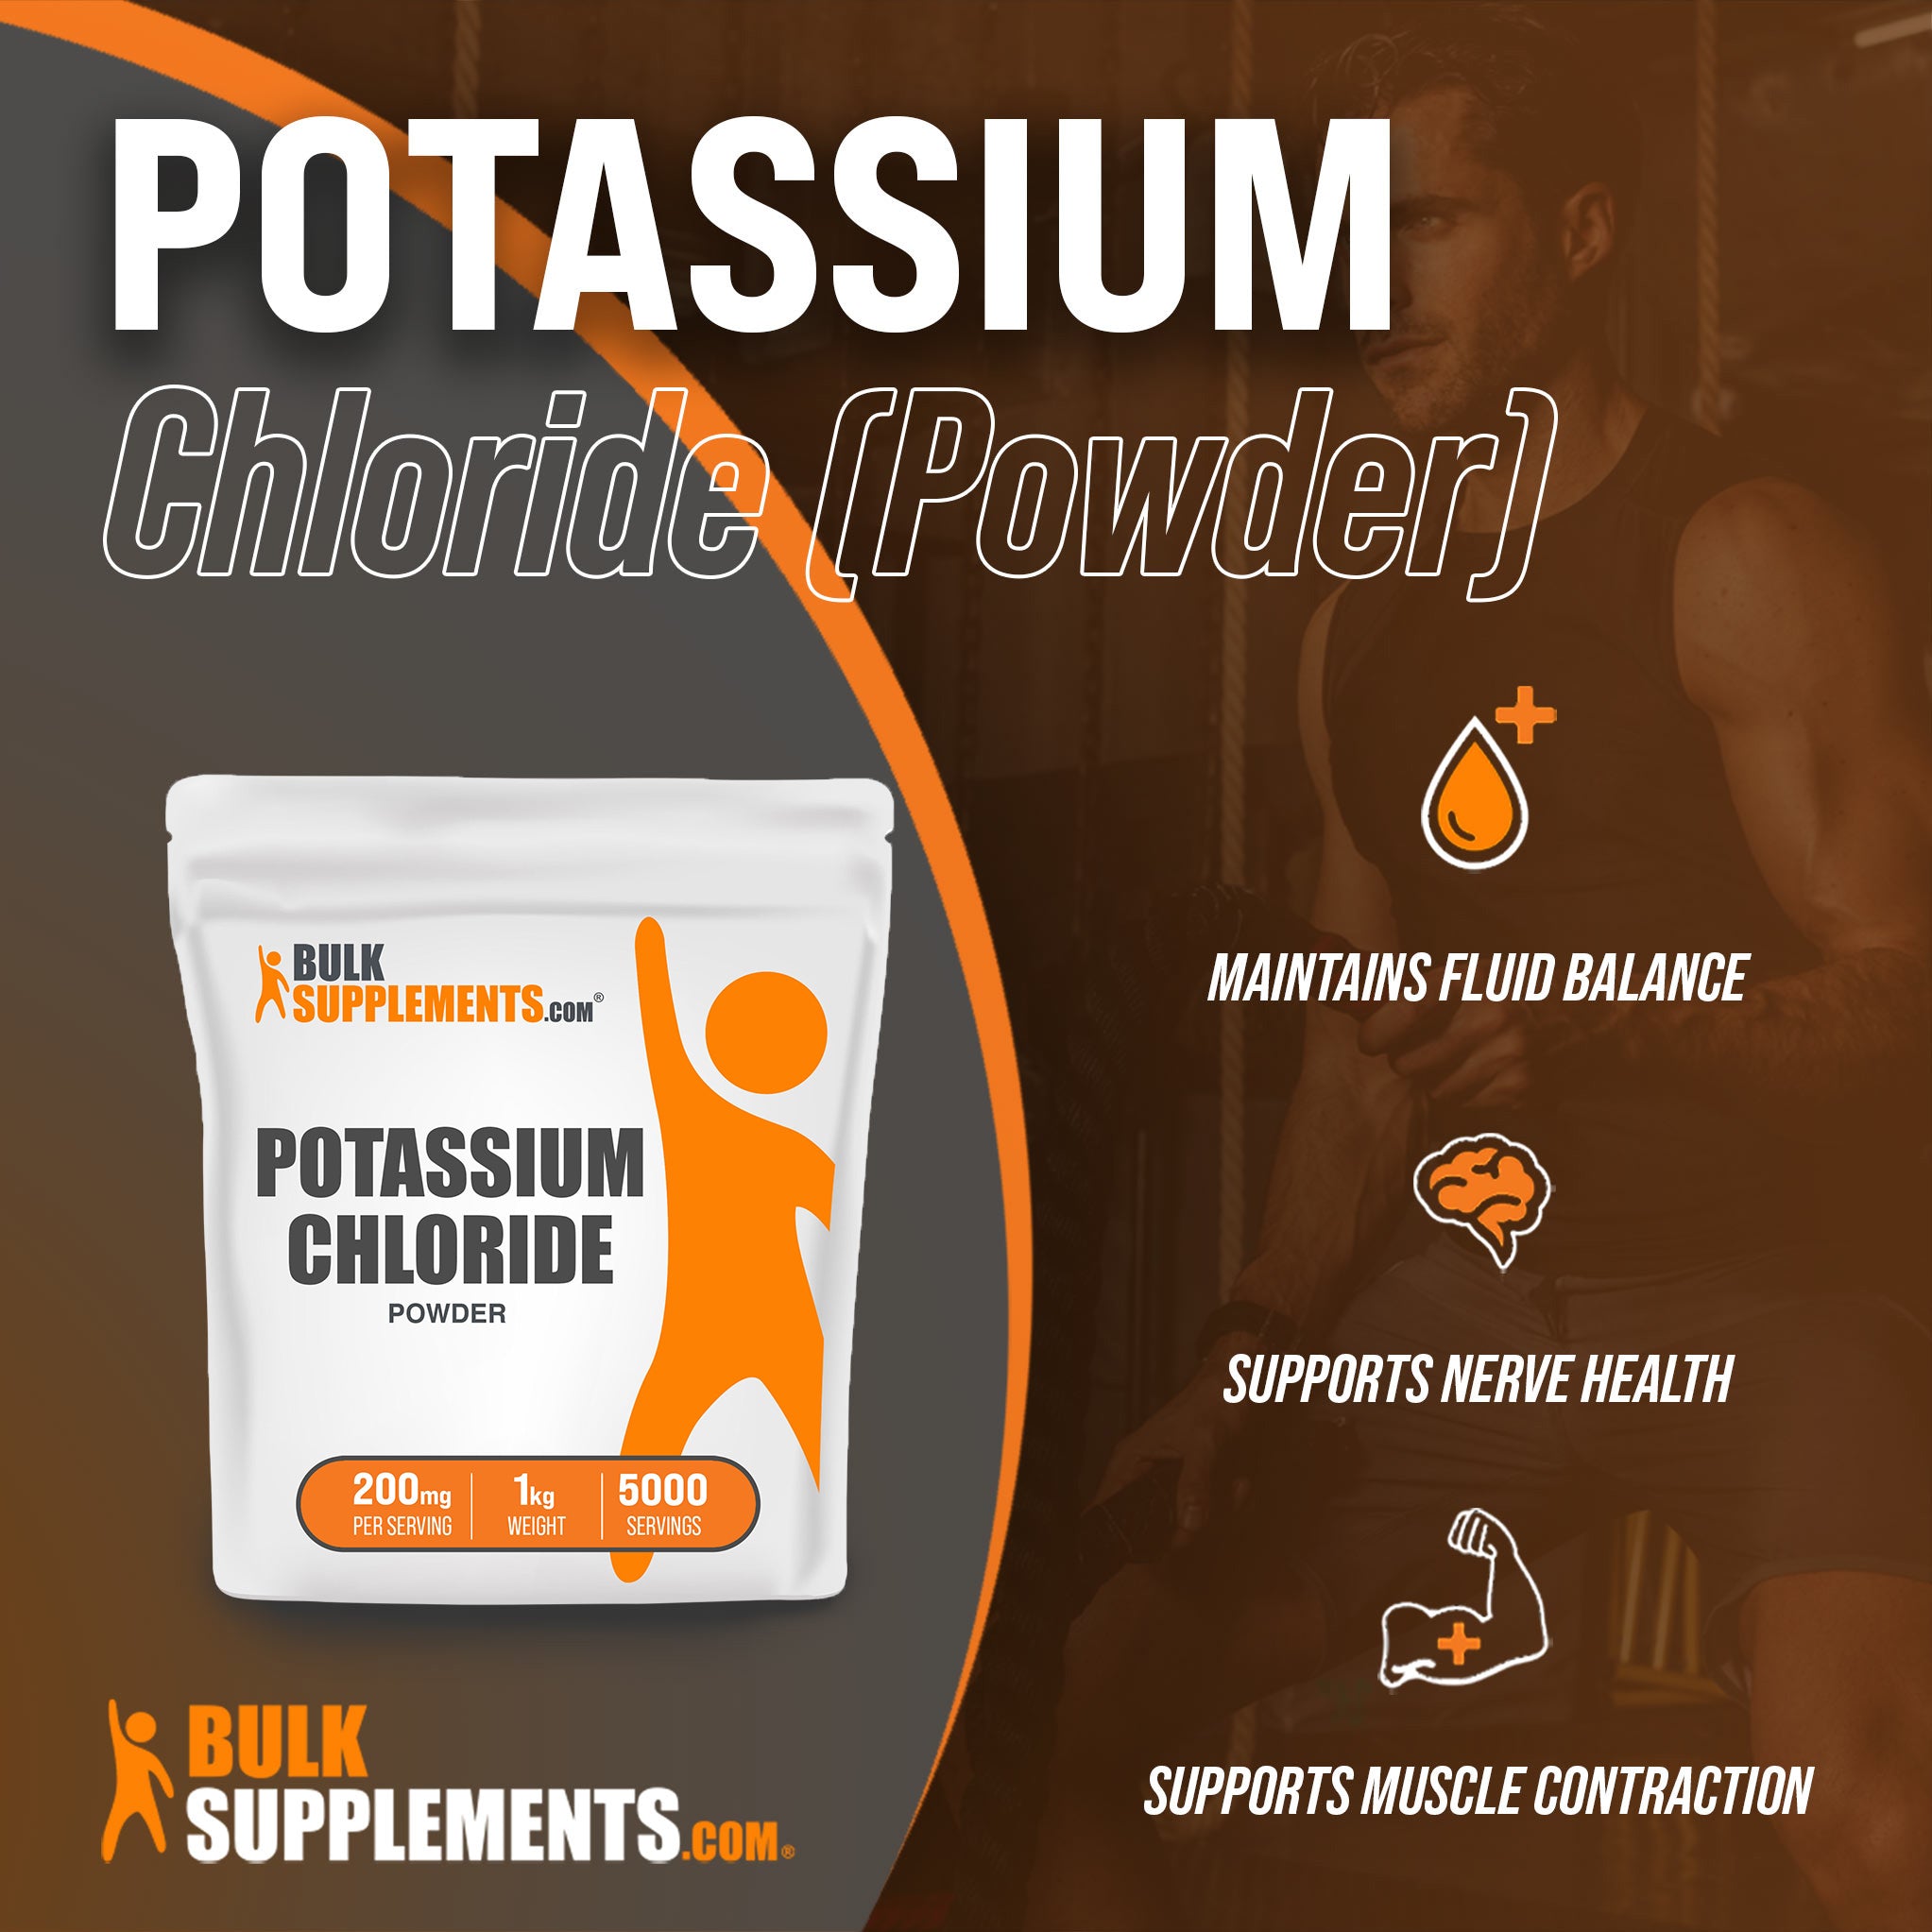 Benefits of Potassium Chloride: maintains fluid balance, supports nerve health, supports muscle contraction